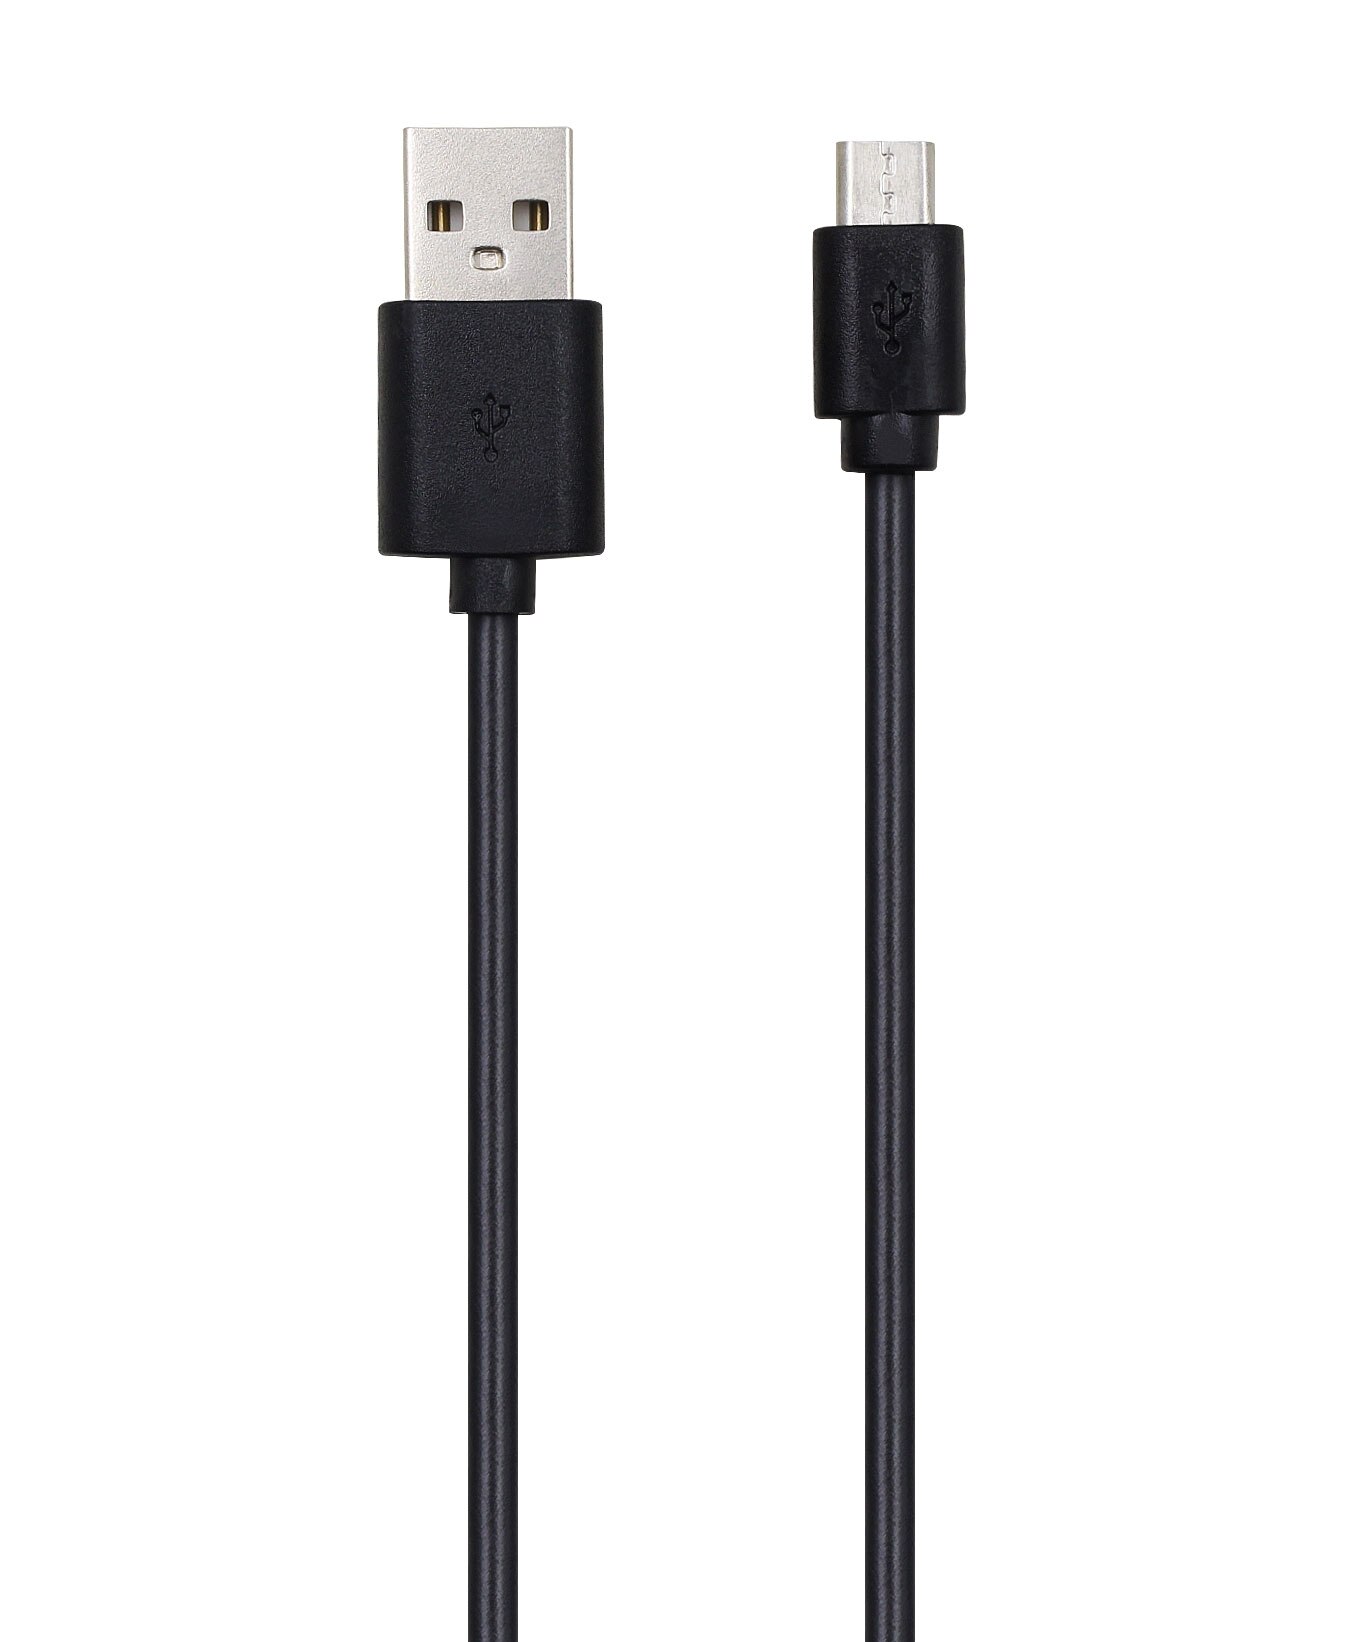 6ft Extra Lange USB Charger Cable Koord Voor Samsung Galaxy Tab 4 SM-T530NU Tablet